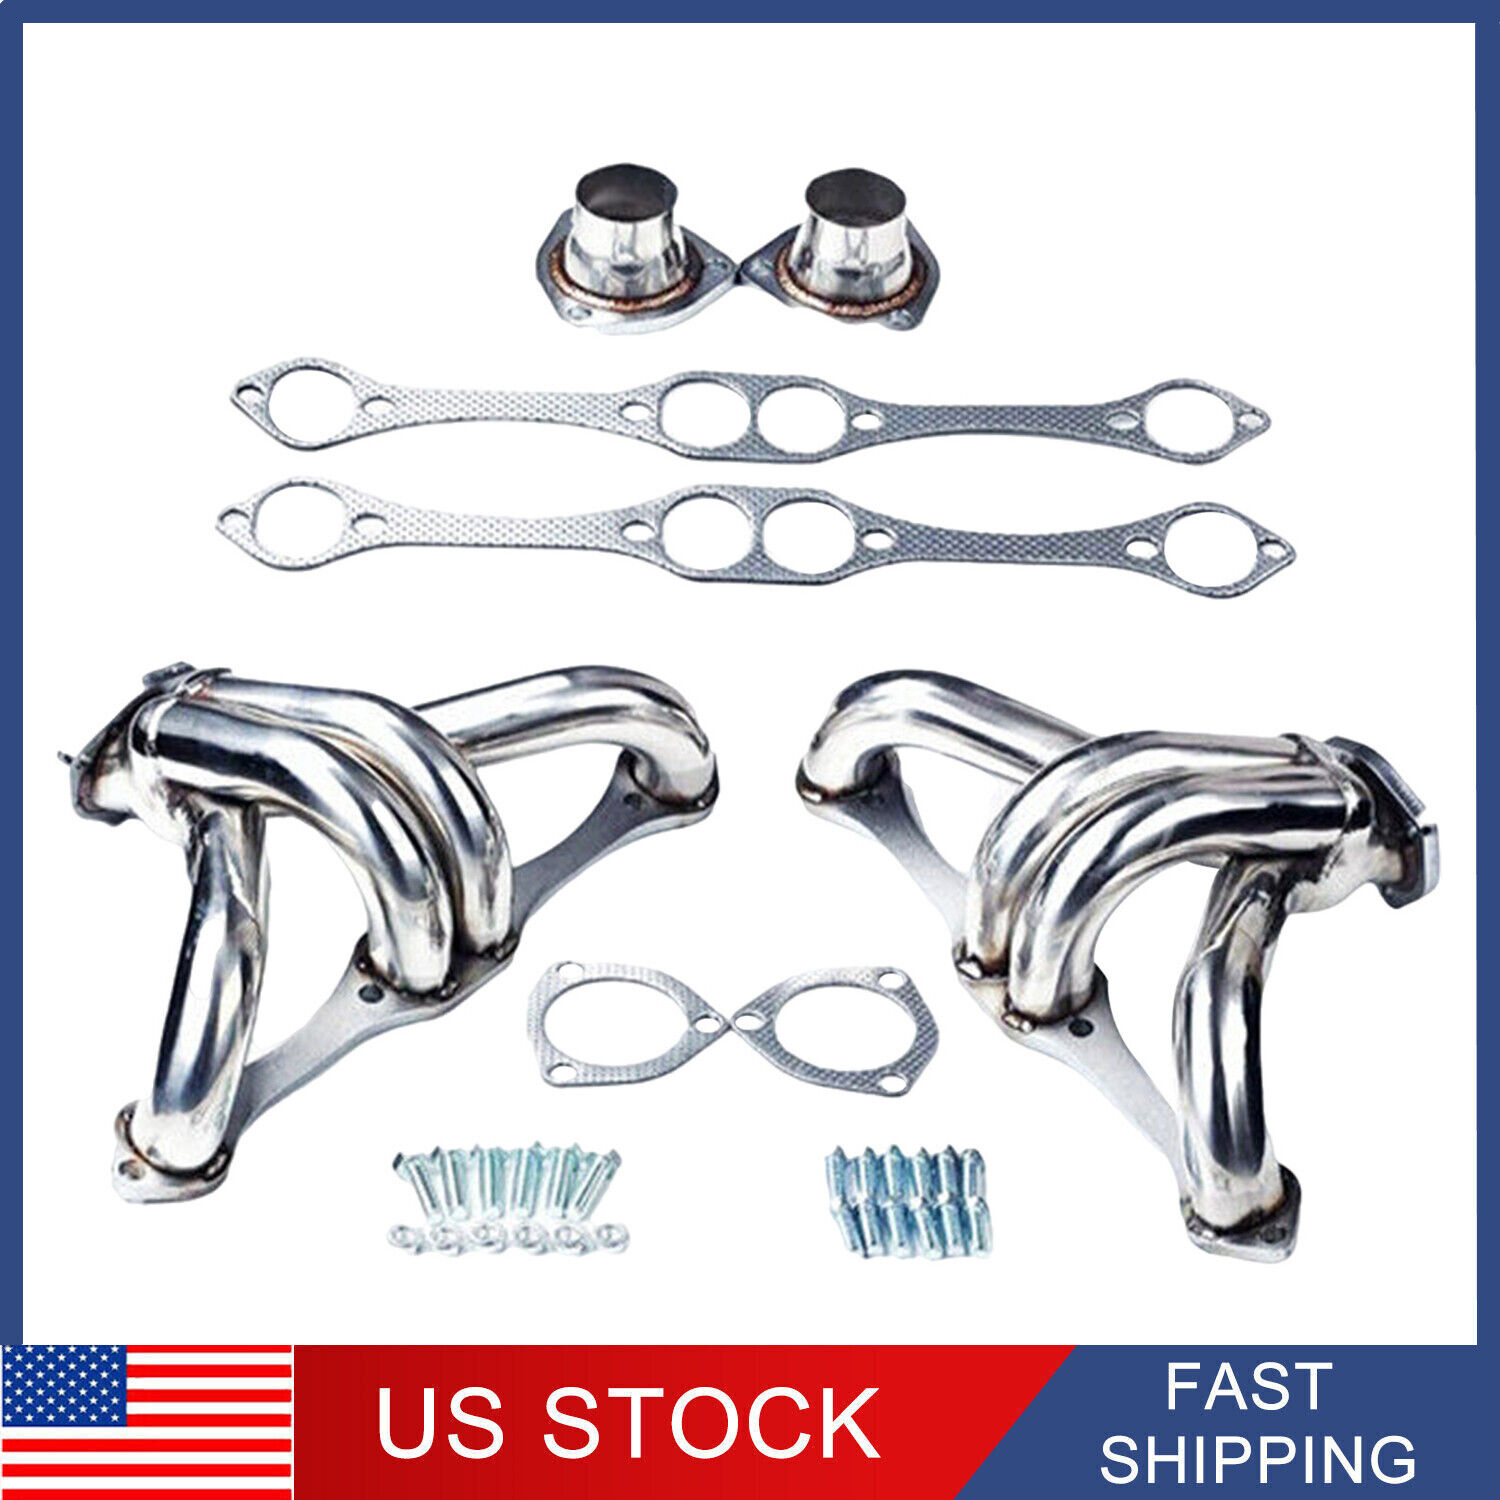 Stainless Shorty Hugger Headers For 283-400 Small Block Chevy Street Rod SBC USA